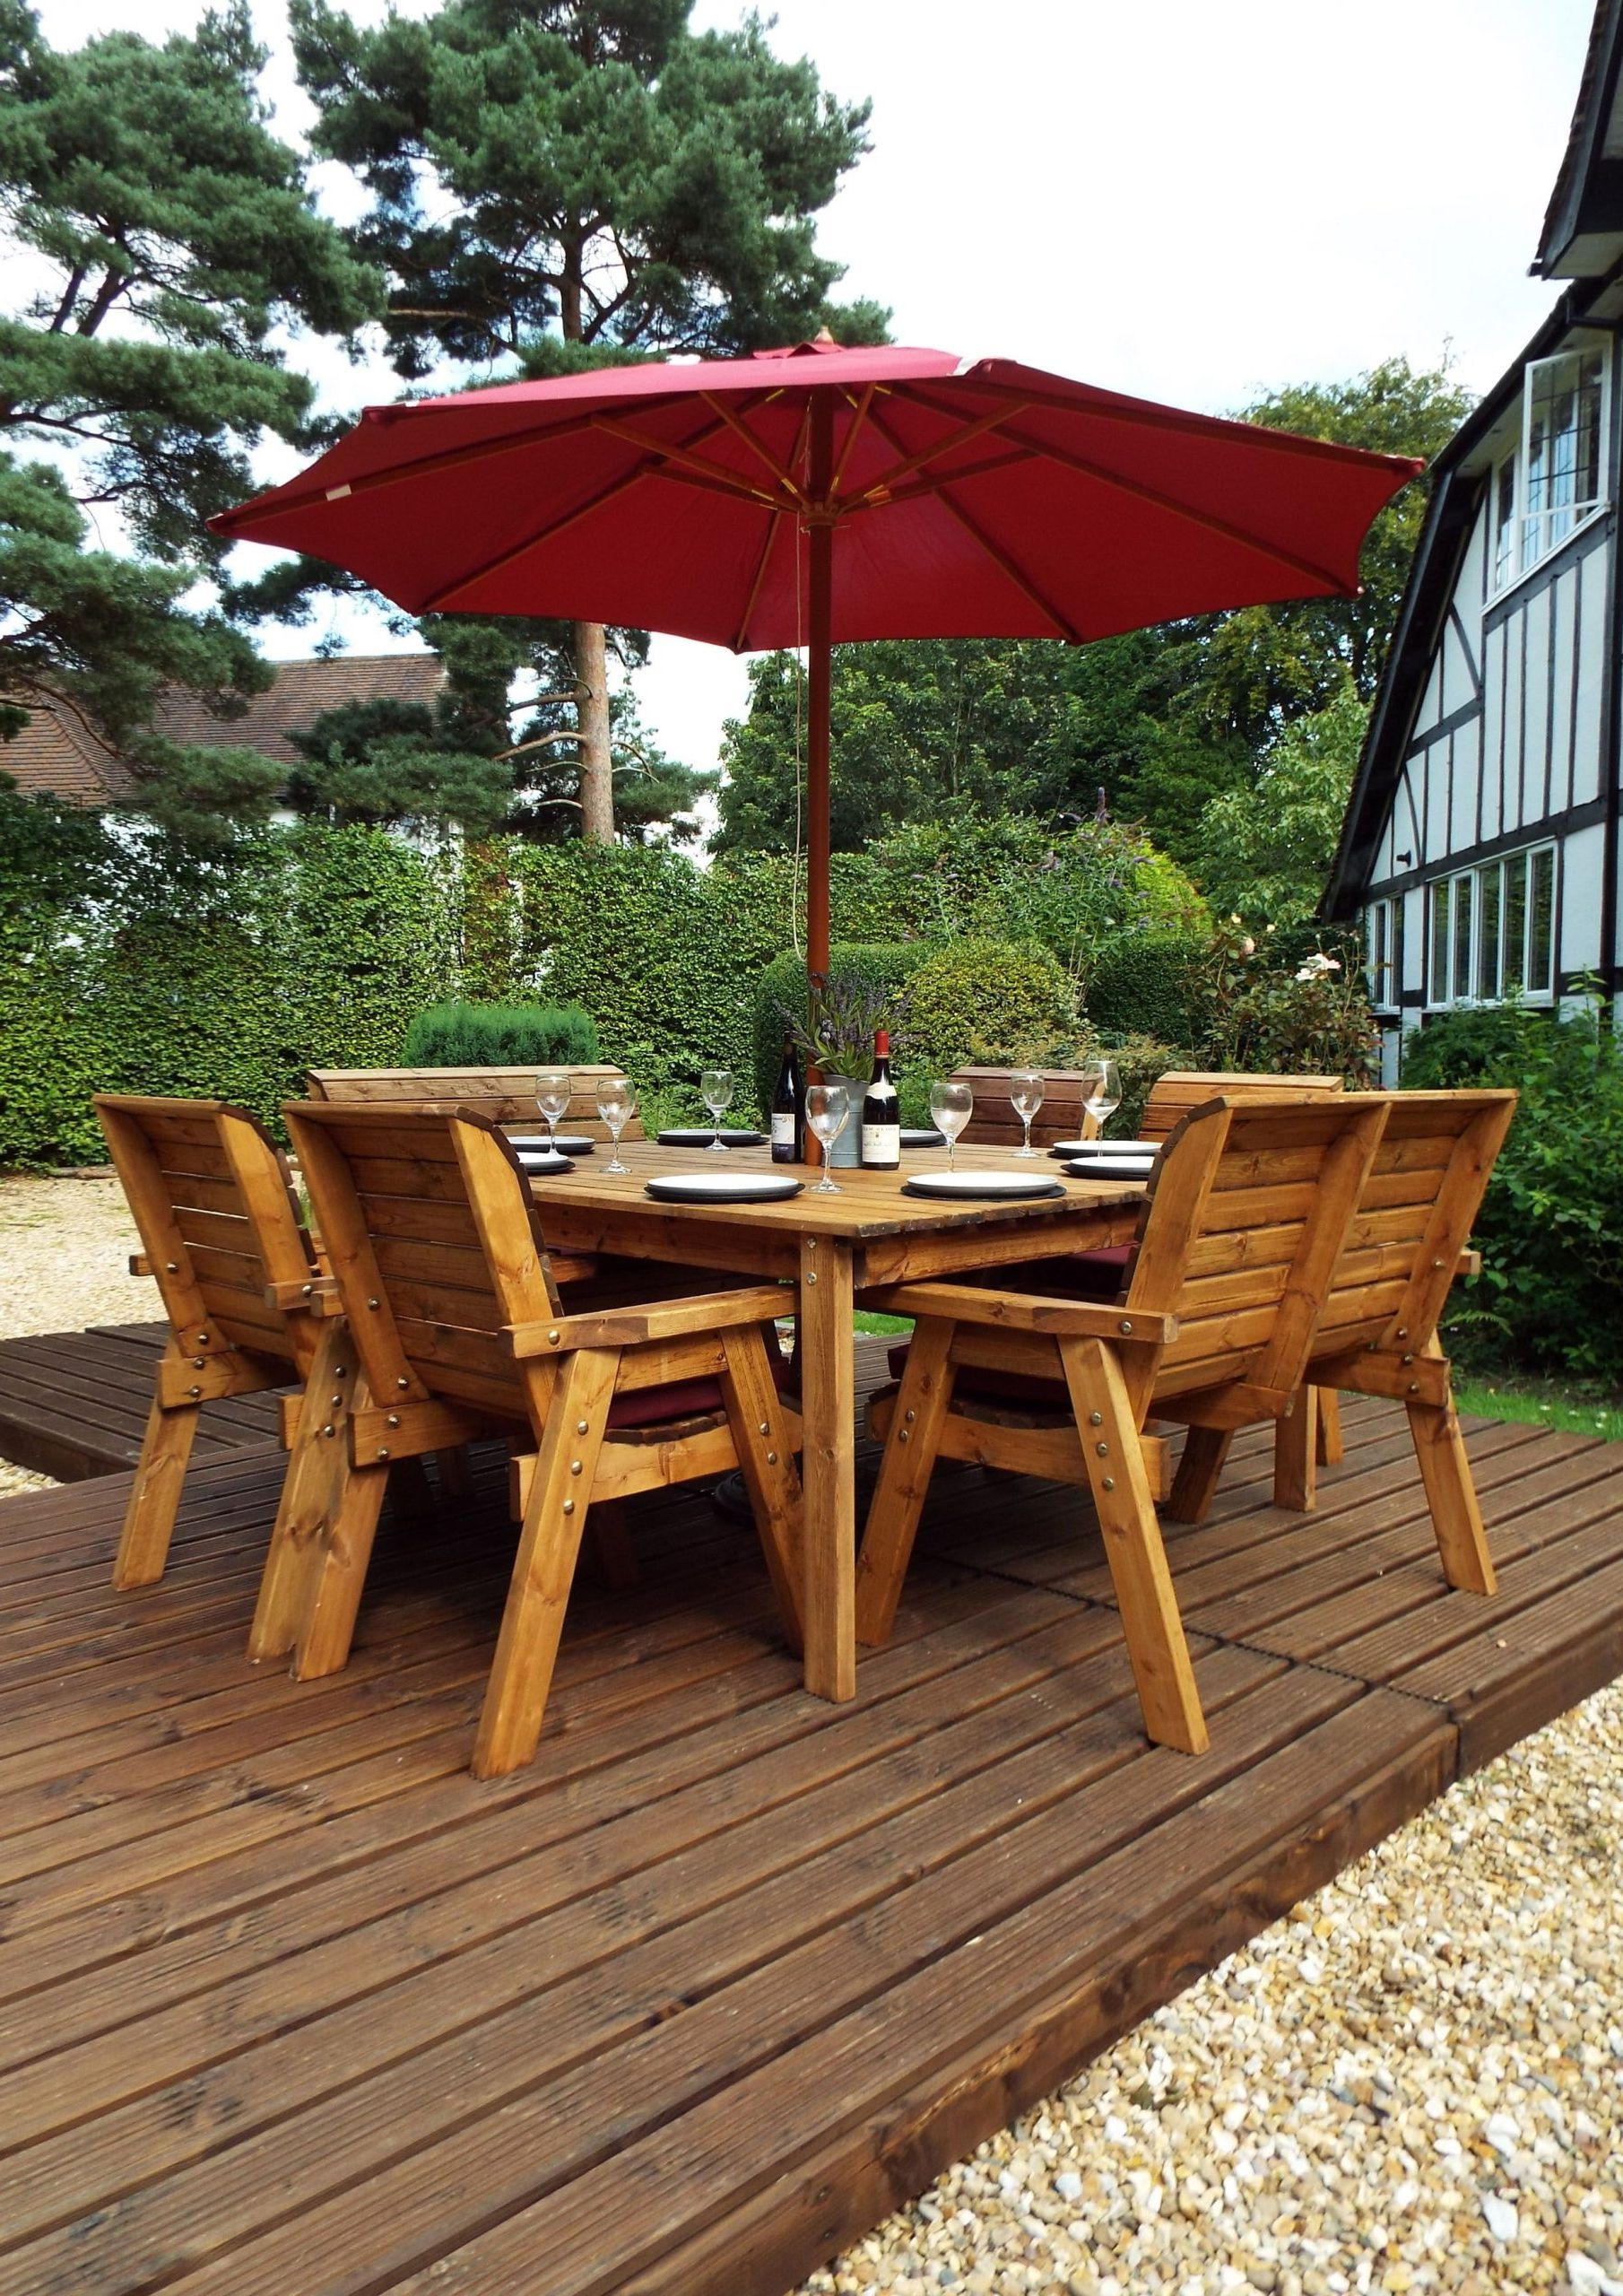 Fashionable 8 Seater Deluxe Square Table Set (4 Chairs / 2 Benches) Charles Taylor With Regard To Deluxe Square Patio Dining Sets (View 8 of 15)